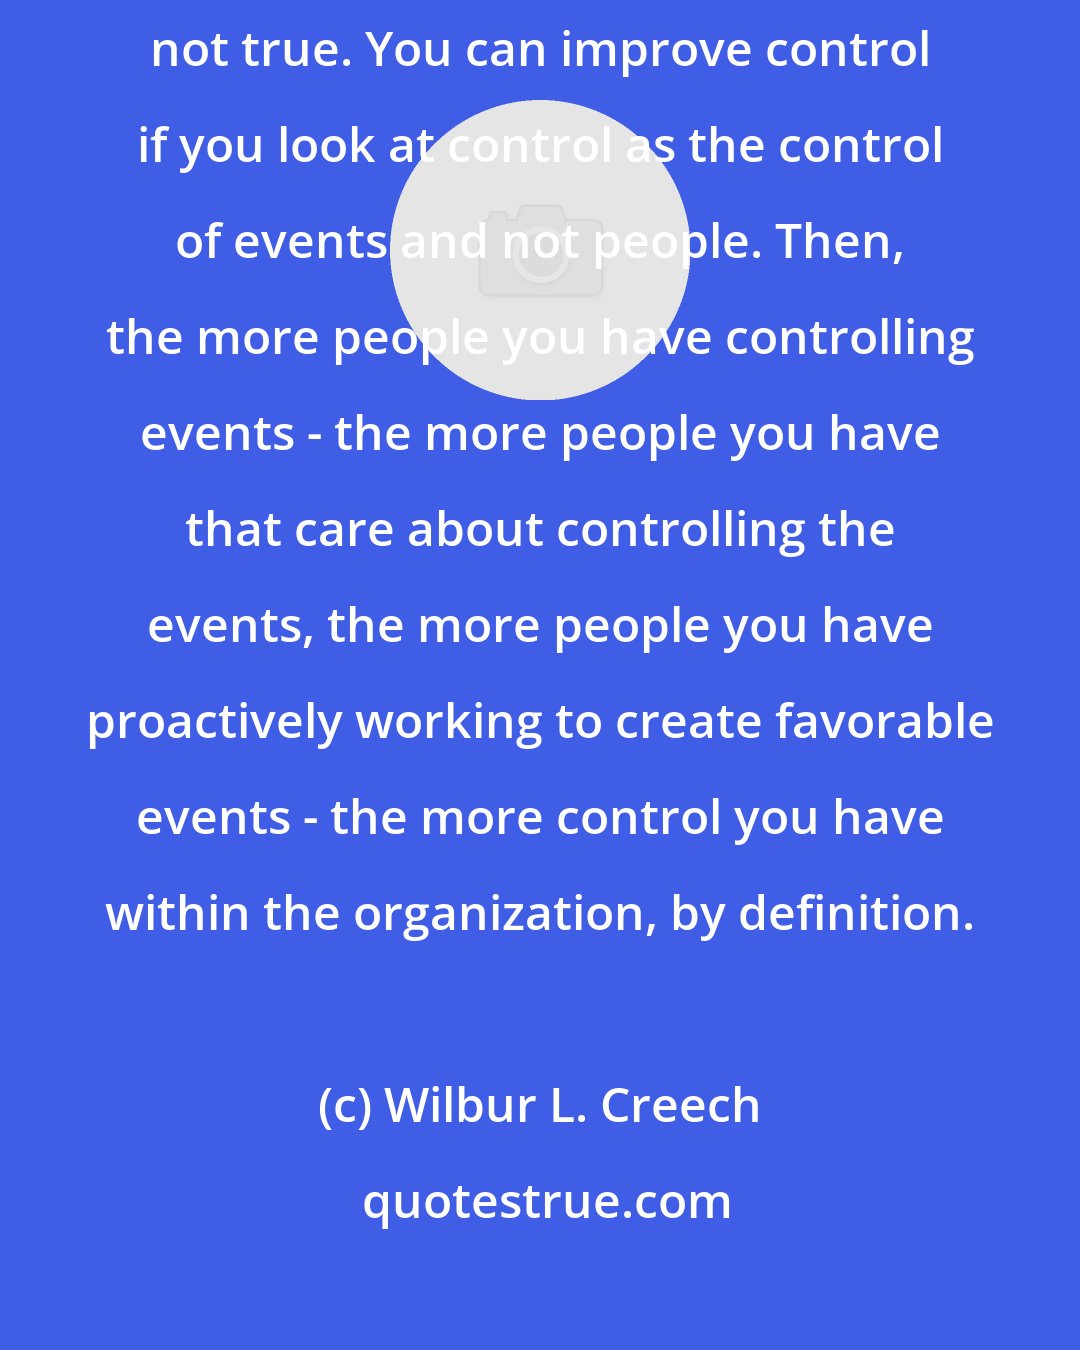 Wilbur L. Creech: Many people believe that decentralization means loss of control. That's simply not true. You can improve control if you look at control as the control of events and not people. Then, the more people you have controlling events - the more people you have that care about controlling the events, the more people you have proactively working to create favorable events - the more control you have within the organization, by definition.